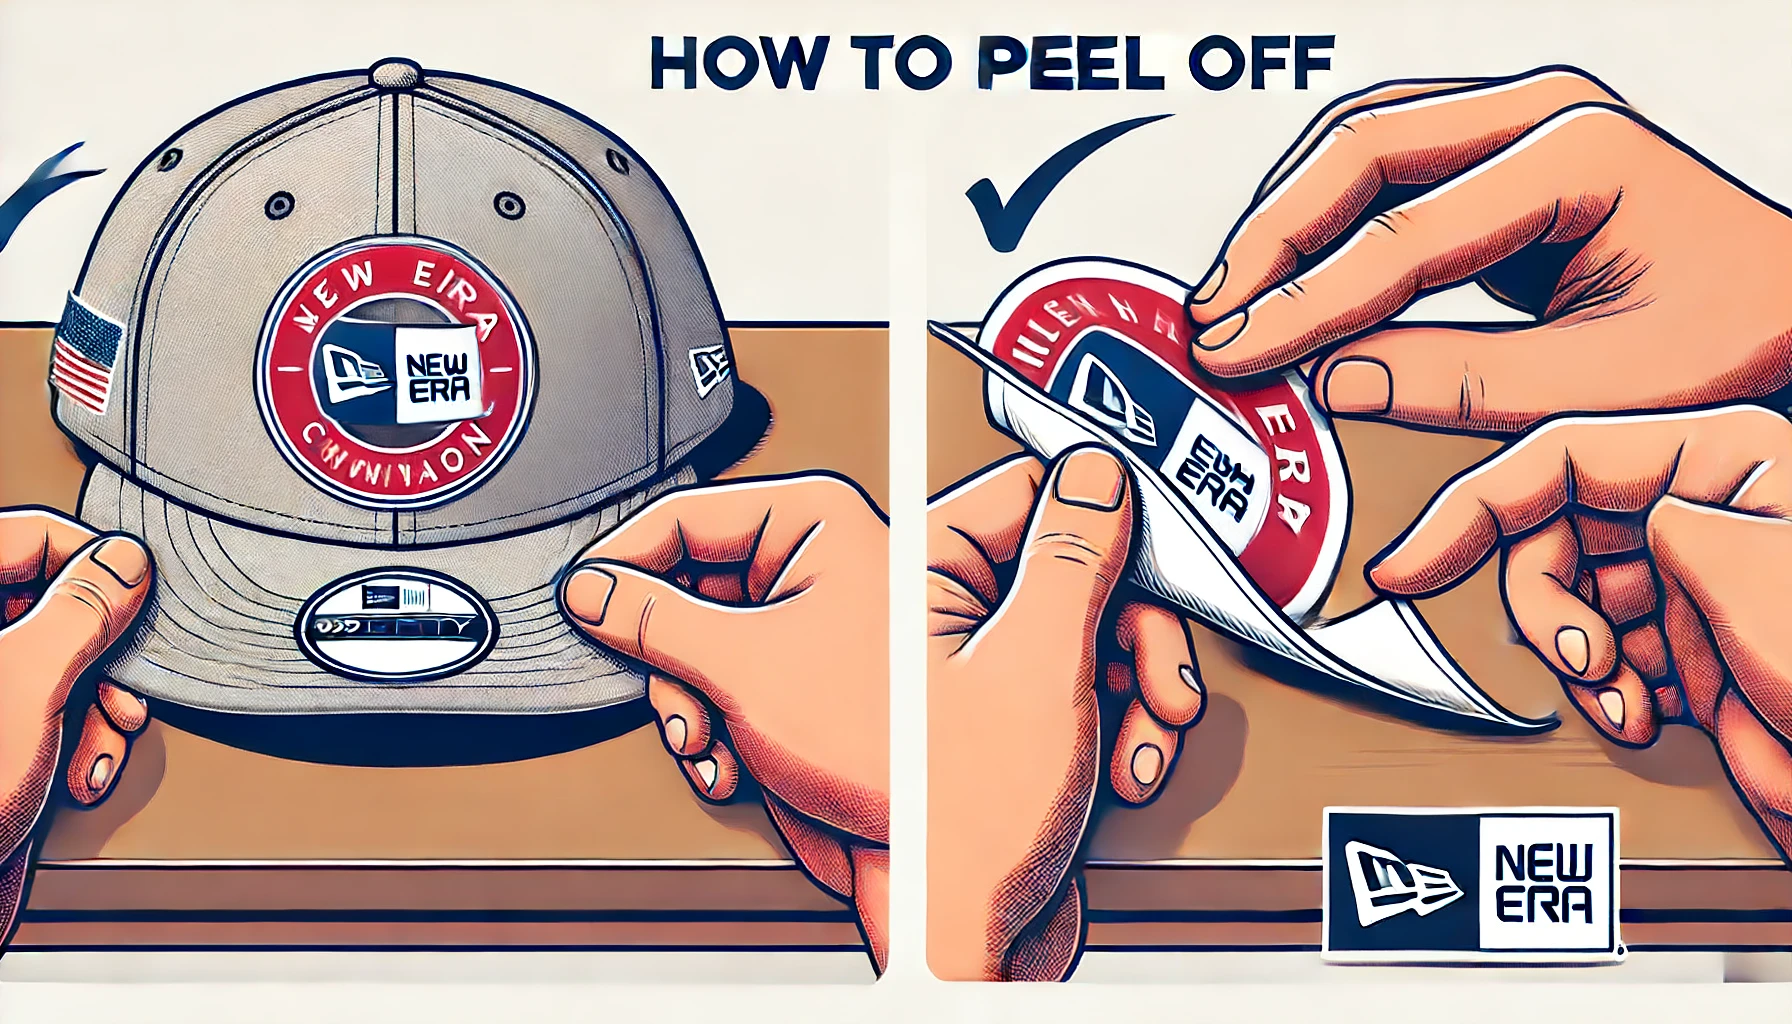 A step-by-step guide showing how to peel off the sticker from a New Era cap. The image includes hands carefully removing the sticker from the cap's brim.